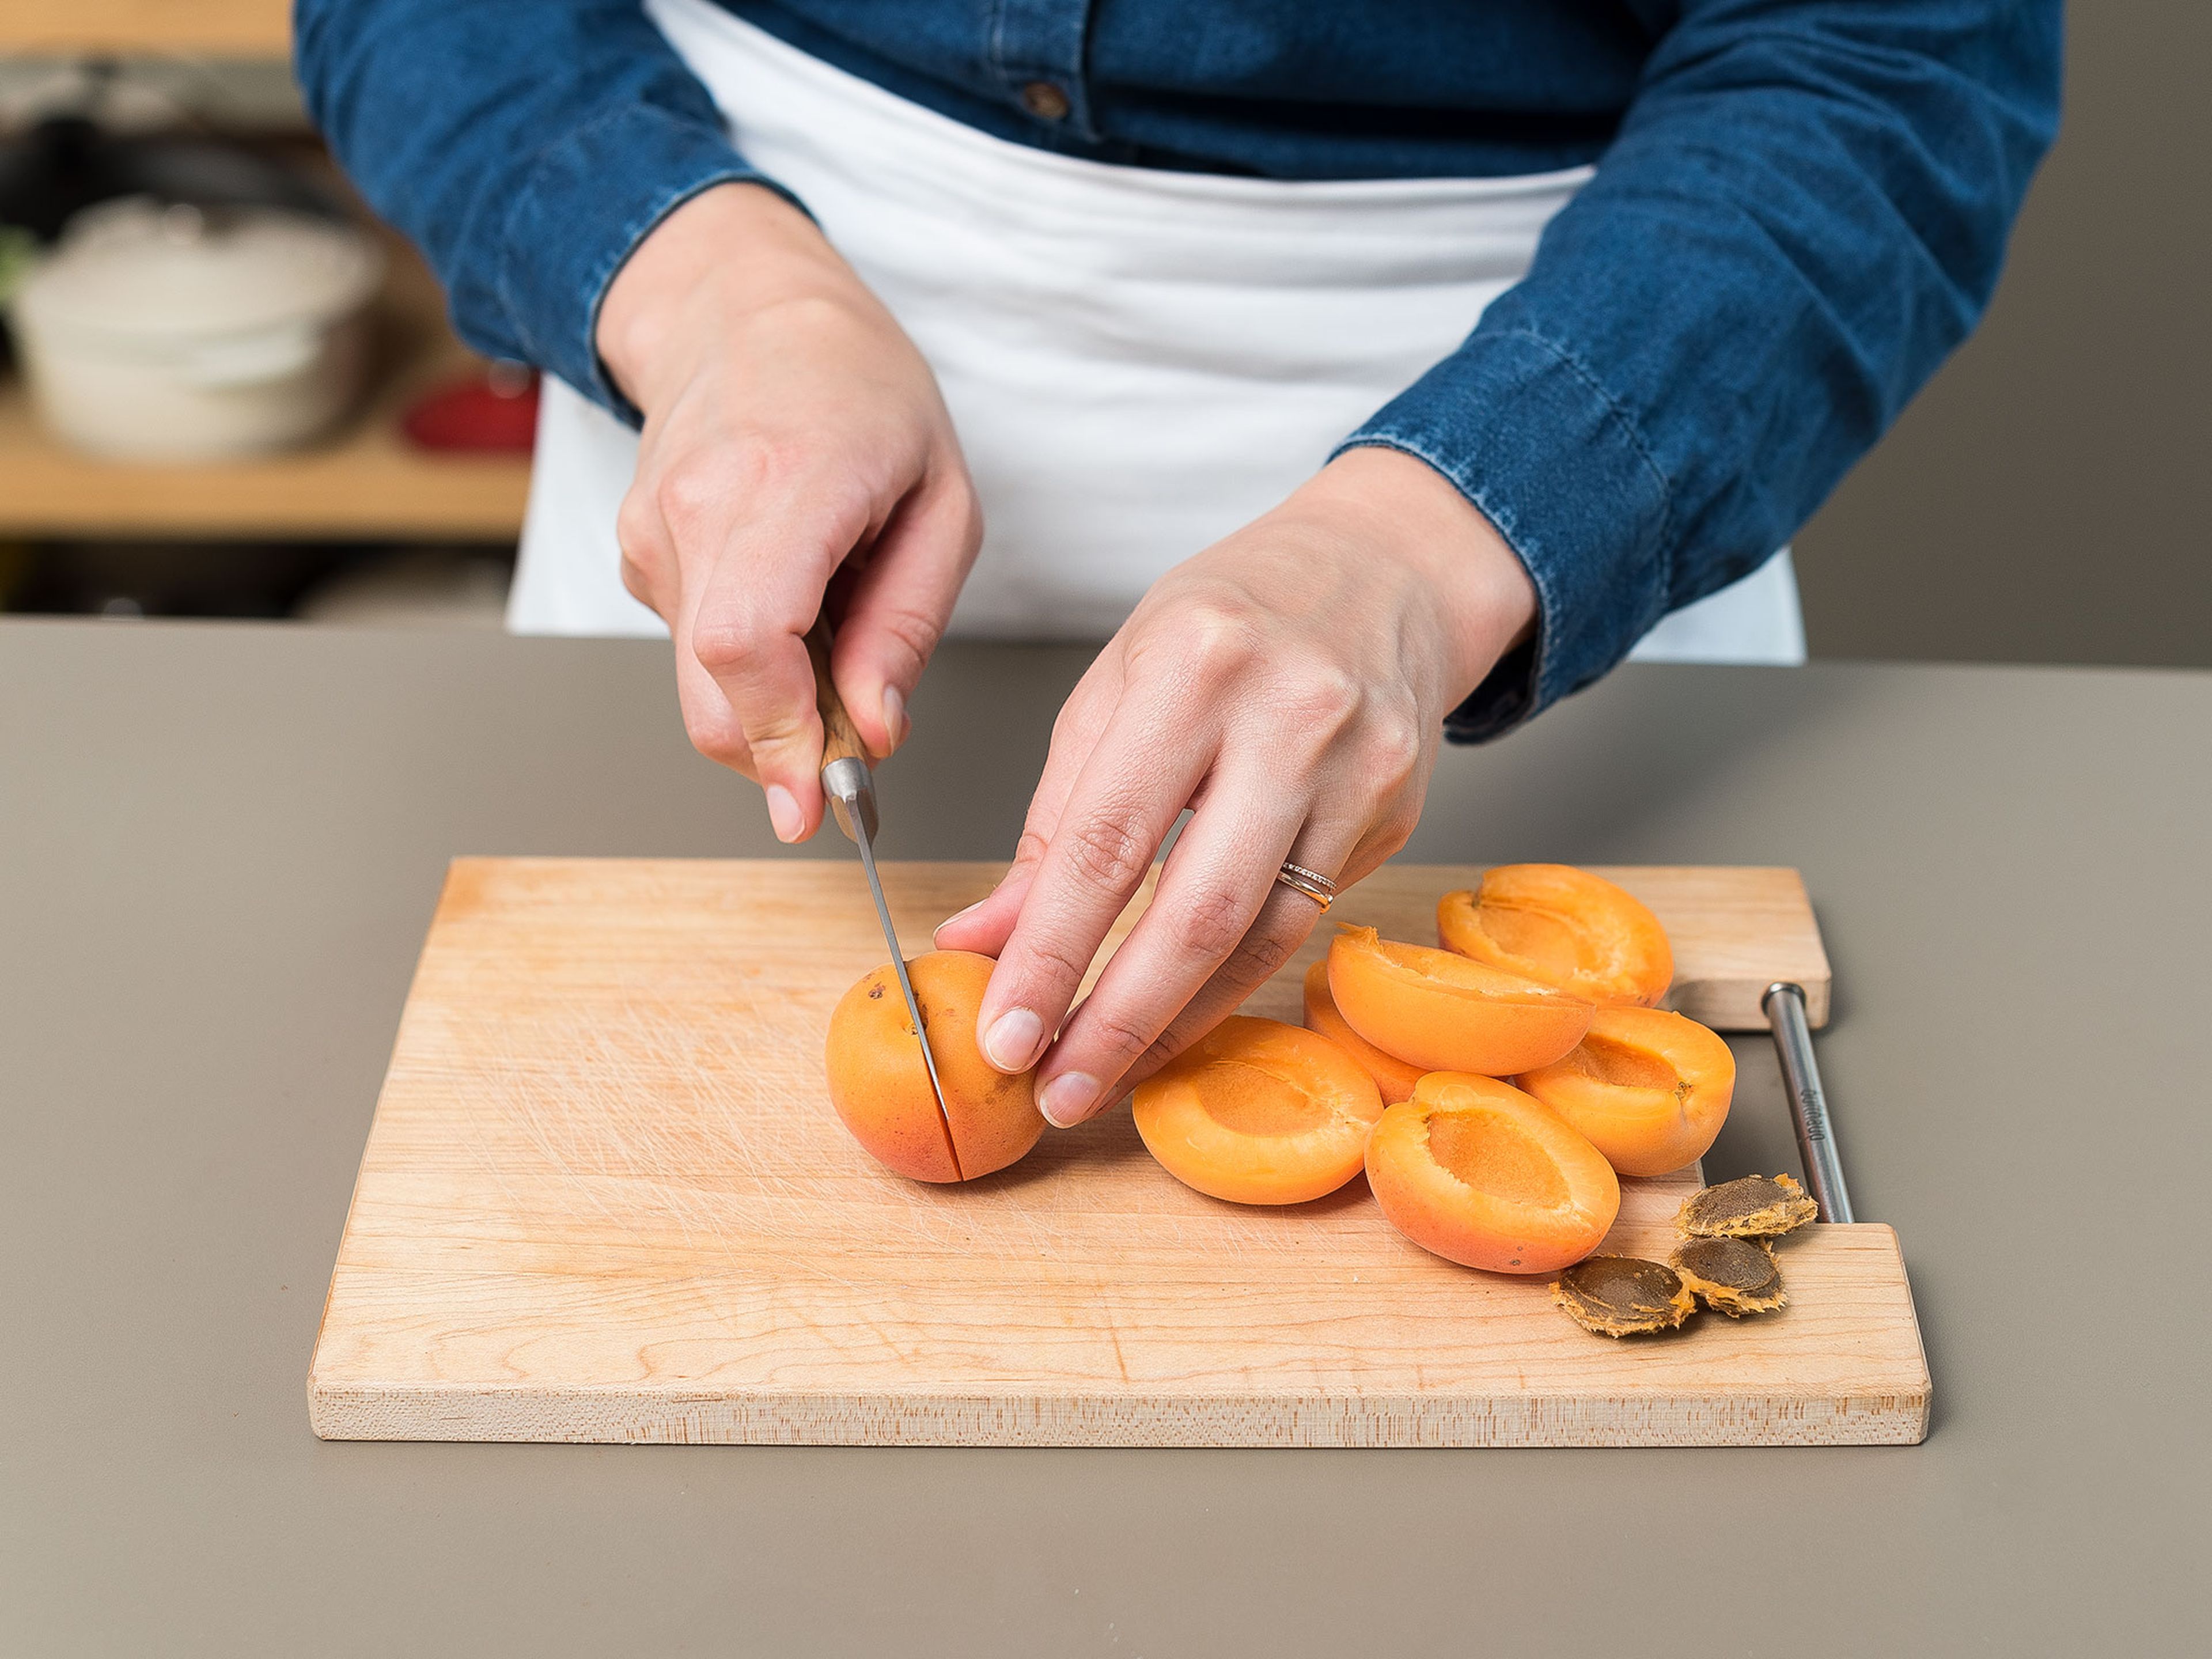 Preheat oven to 200°C/400°F, and grease the tart pan. Melt butter in a small pot over low heat, and set aside to cool. Wash apricots and dry, remove pit with a sharp knife, and cut in halves.